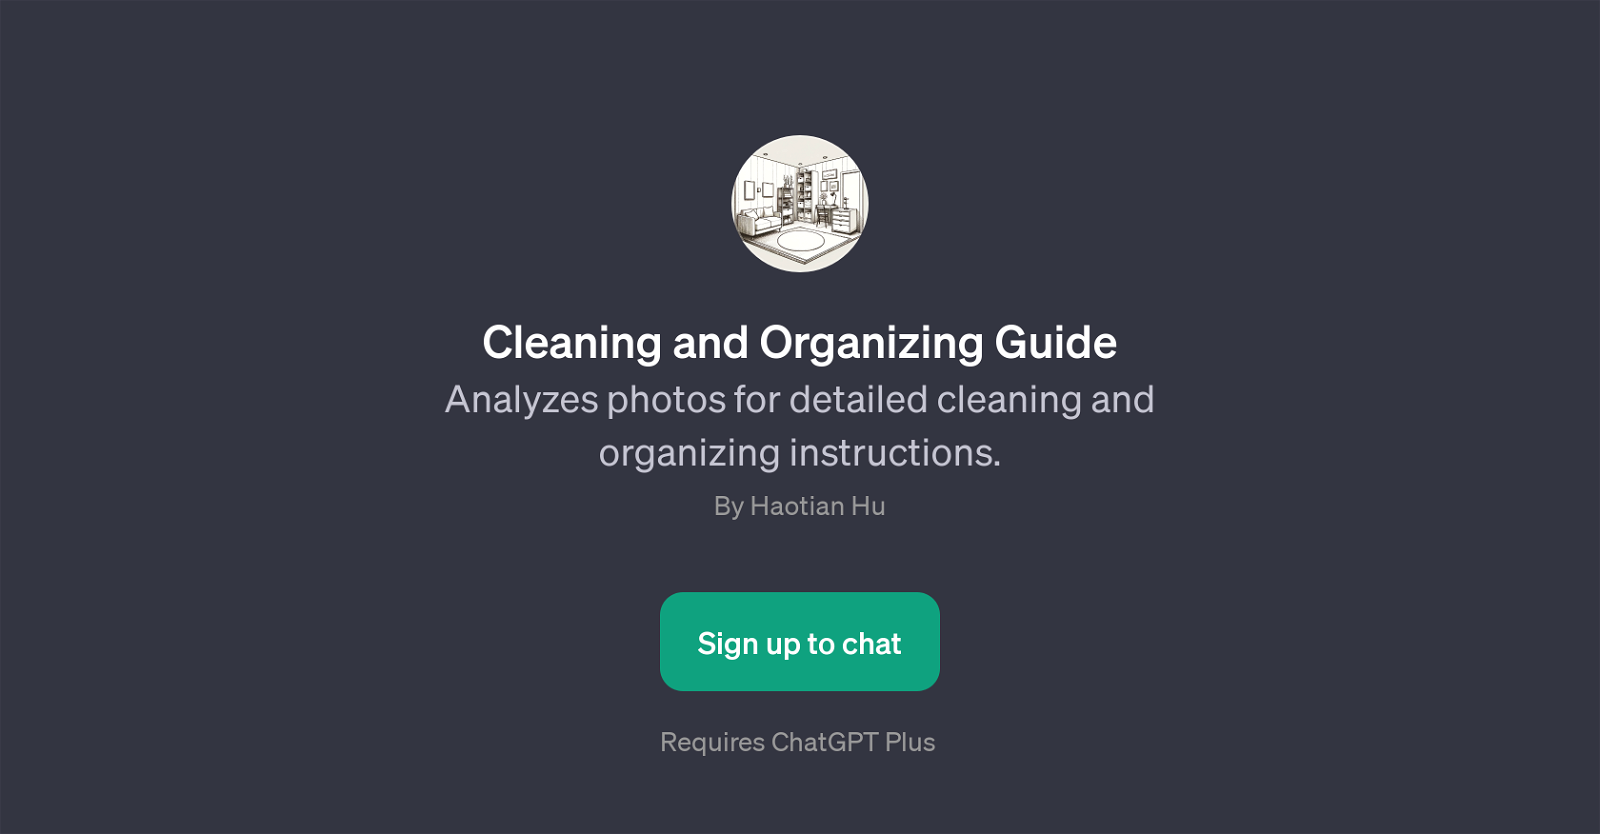 Cleaning and Organizing Guide website